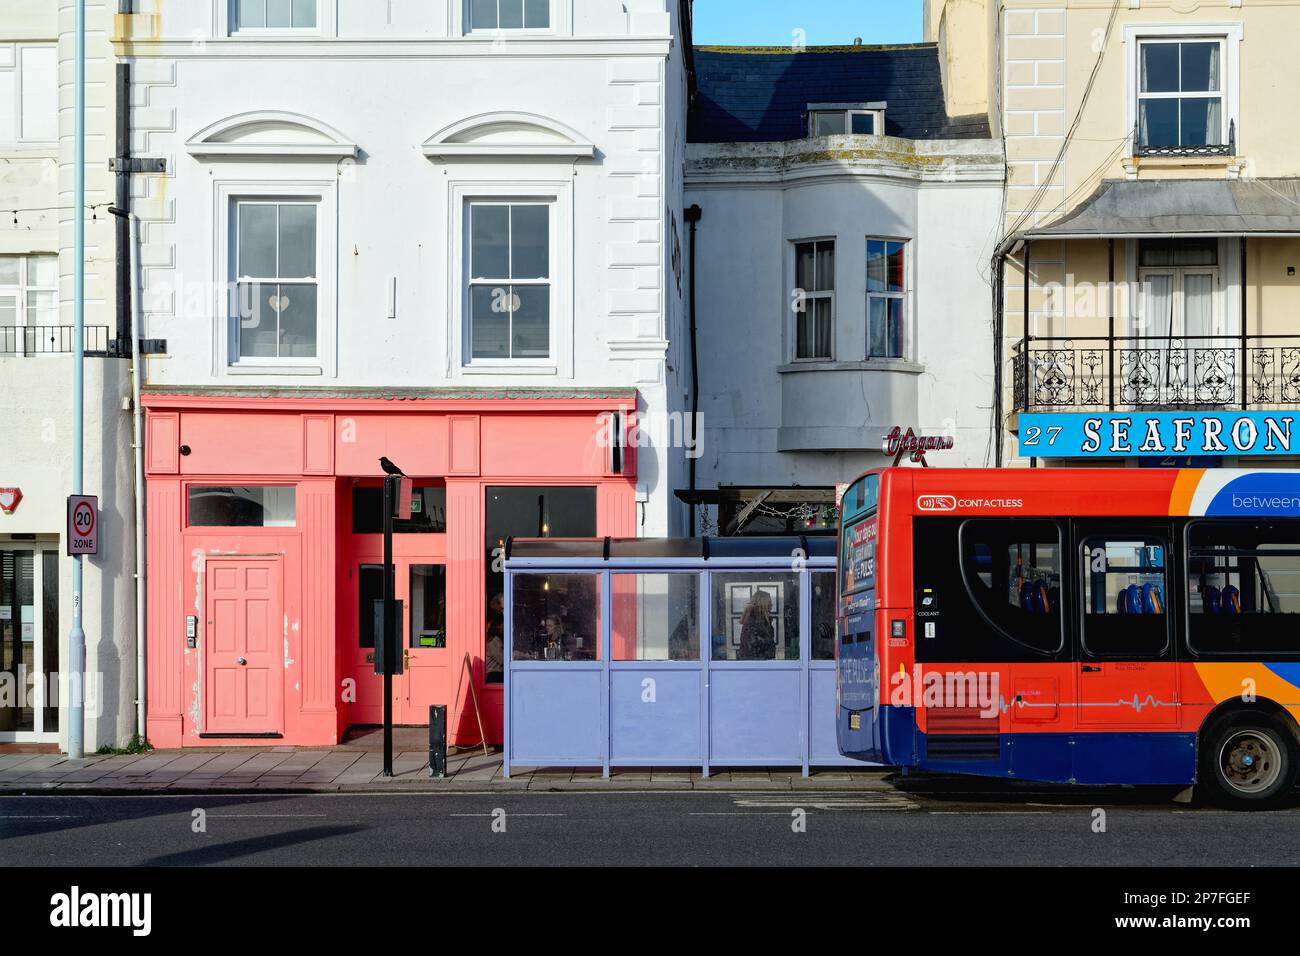 An urban landscape on Worthing seafront creating a semi abstract design formed by a red bus and painted squared shaped building, West Sussex England Stock Photo